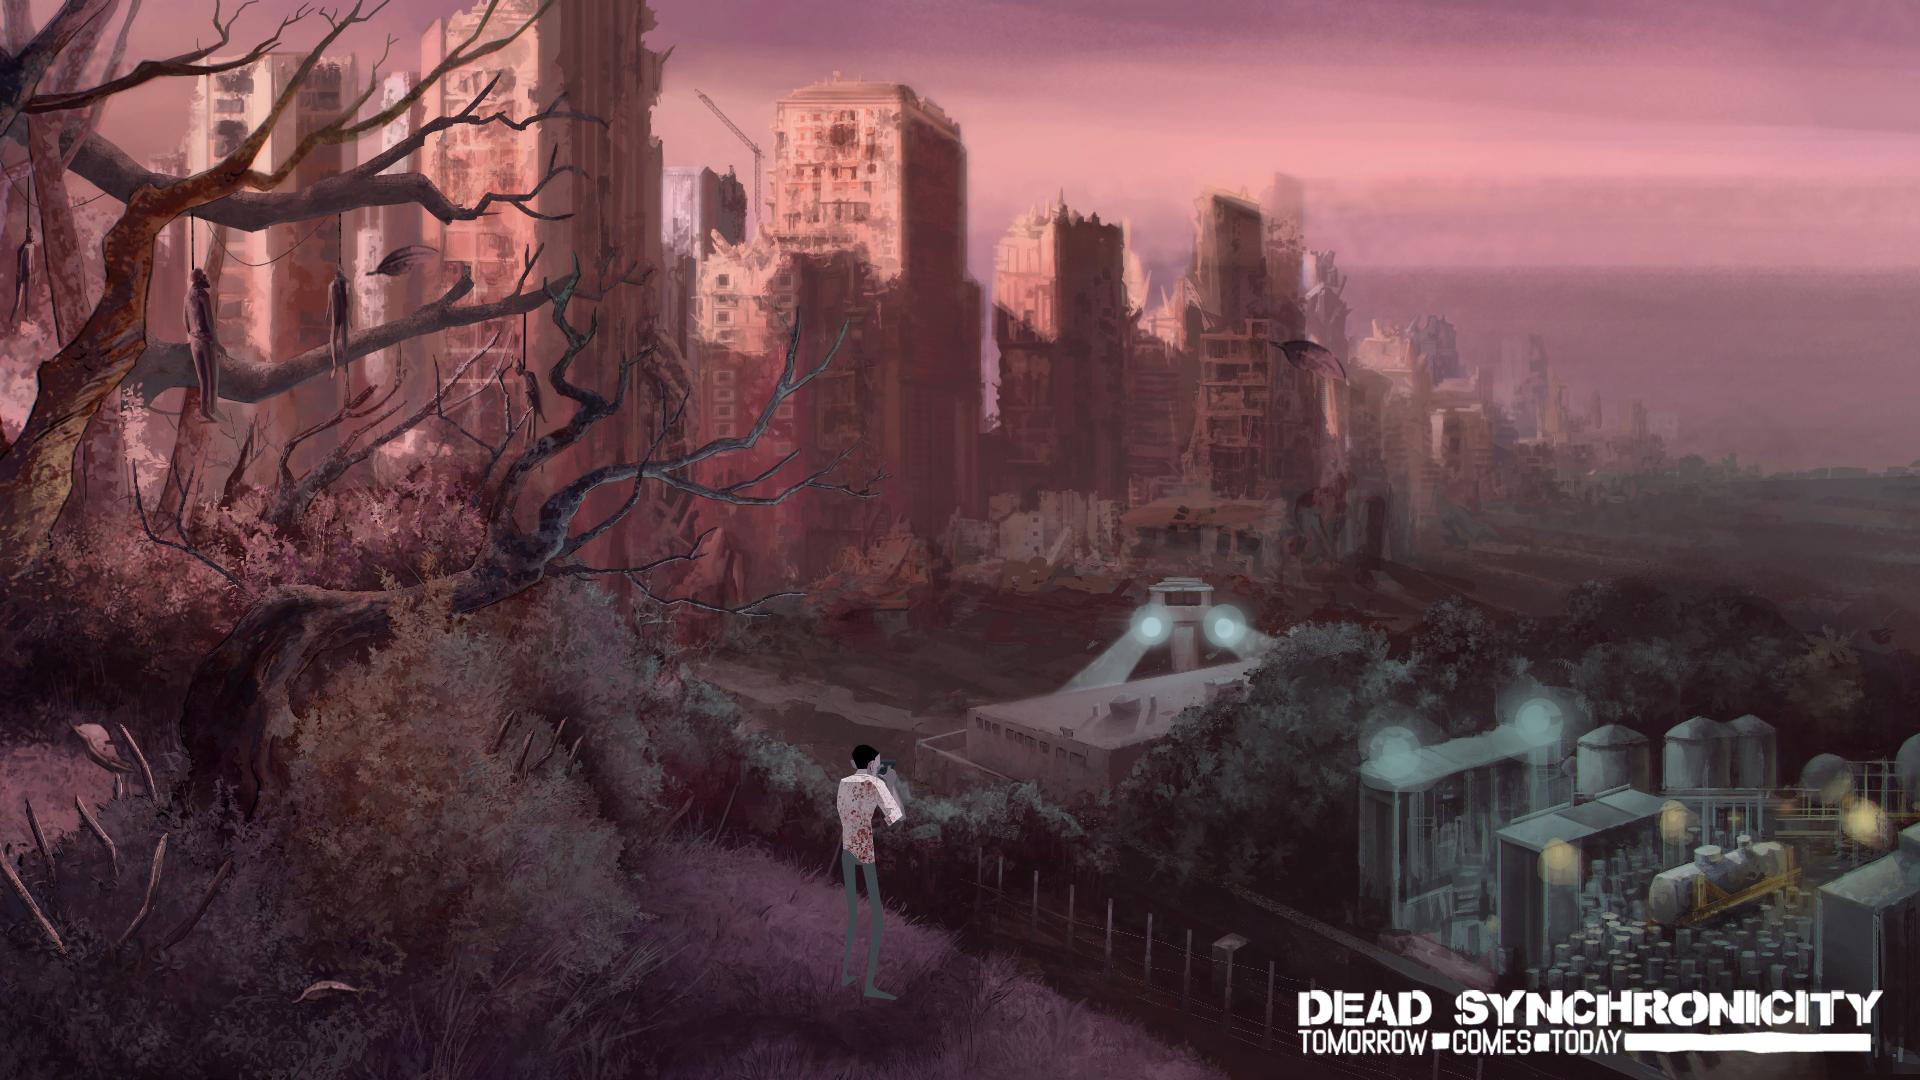 HQ Dead Synchronicity: Tomorrow Comes Today Wallpapers | File 910.84Kb